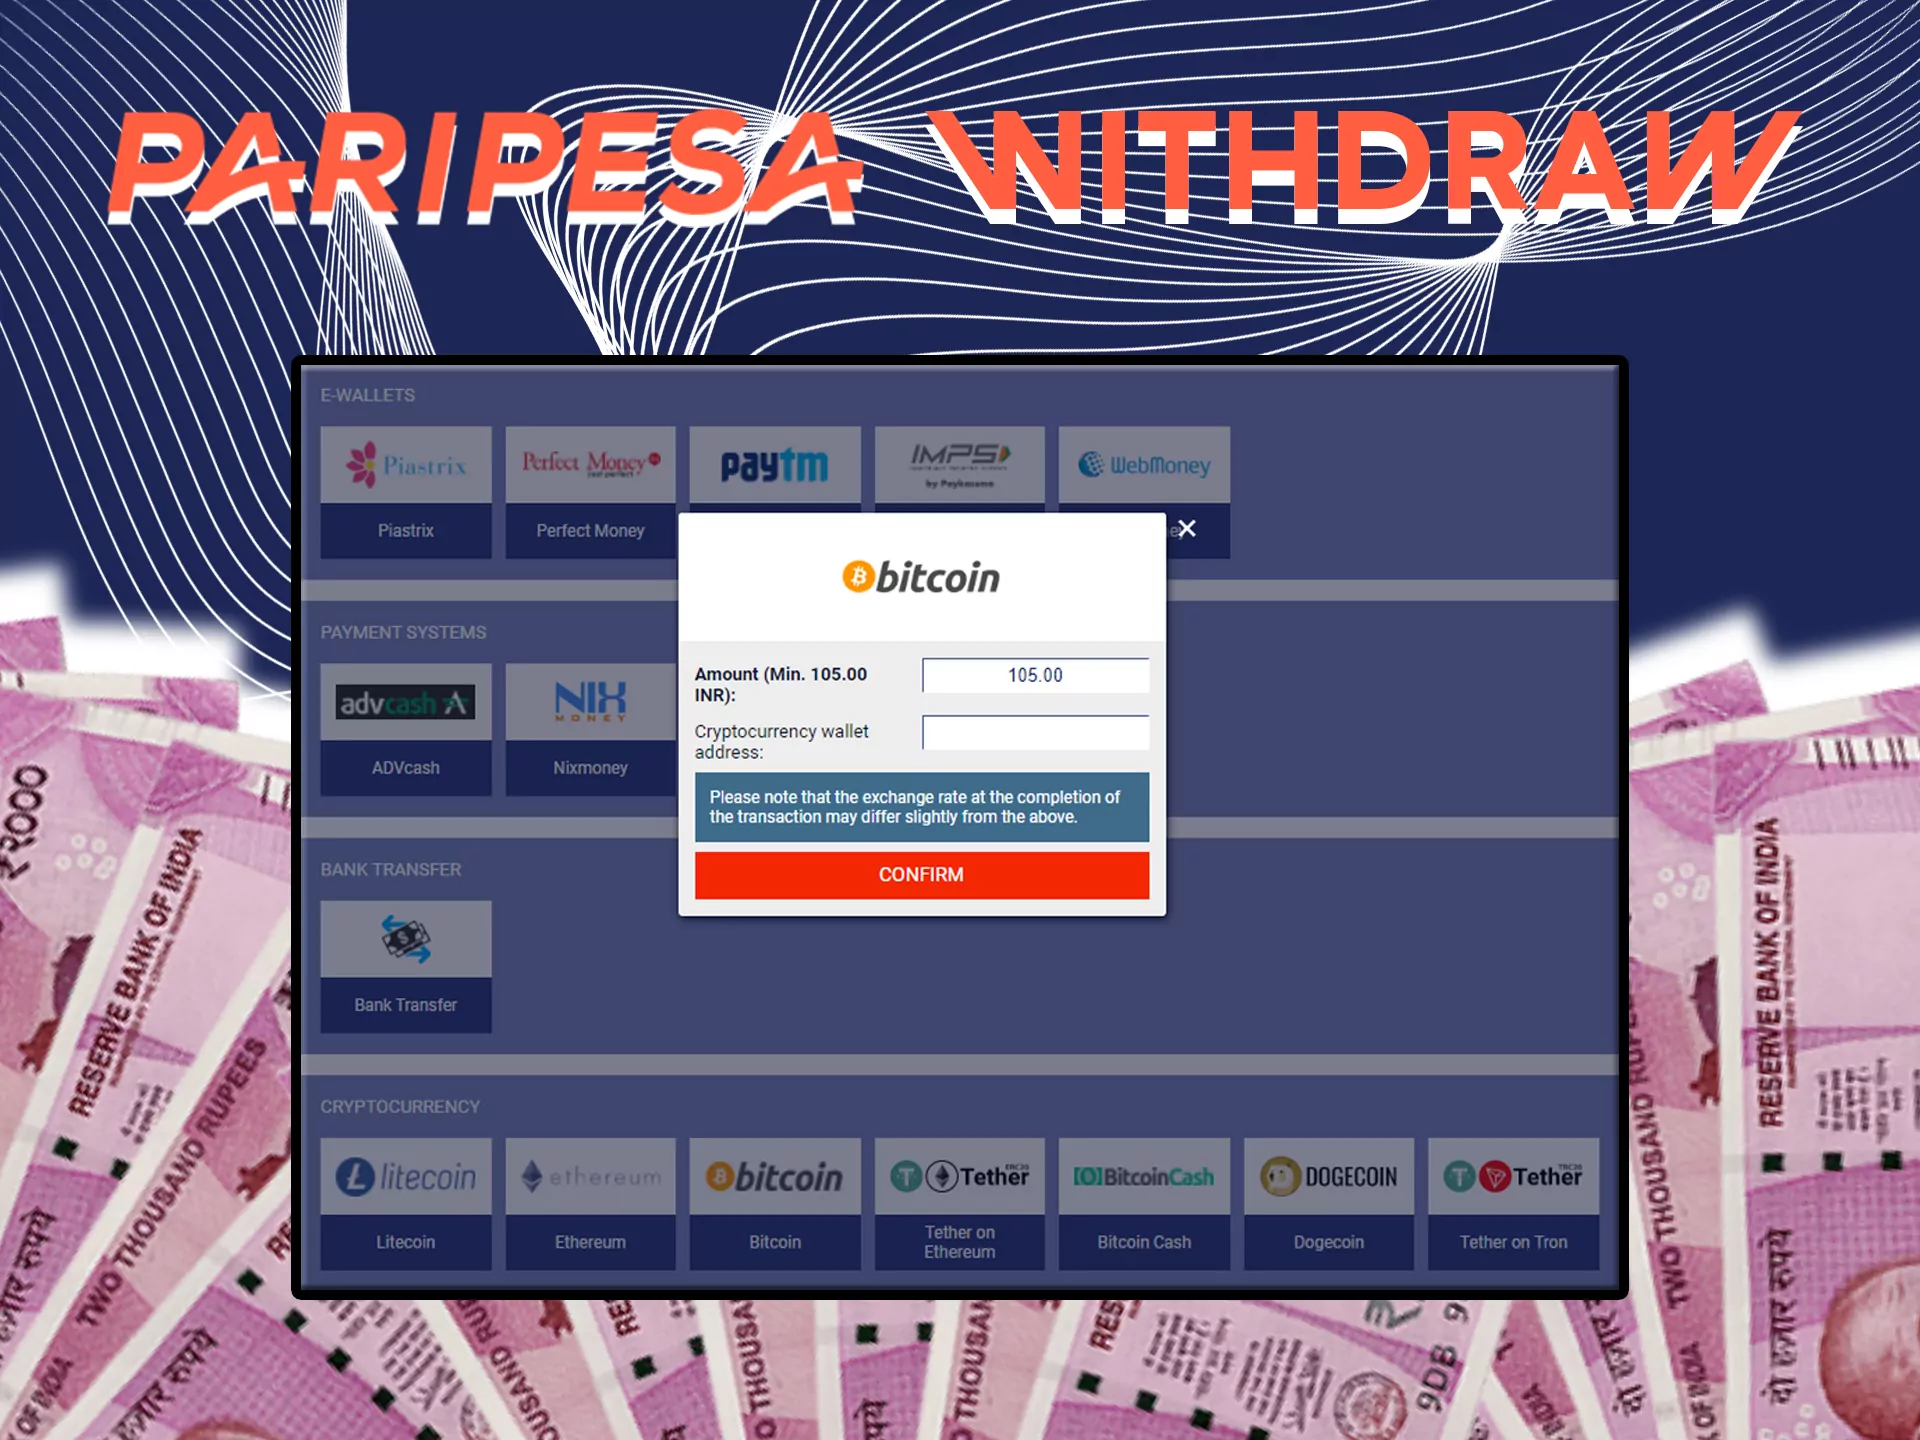 Withdraw money without difficulties at Paripesa.